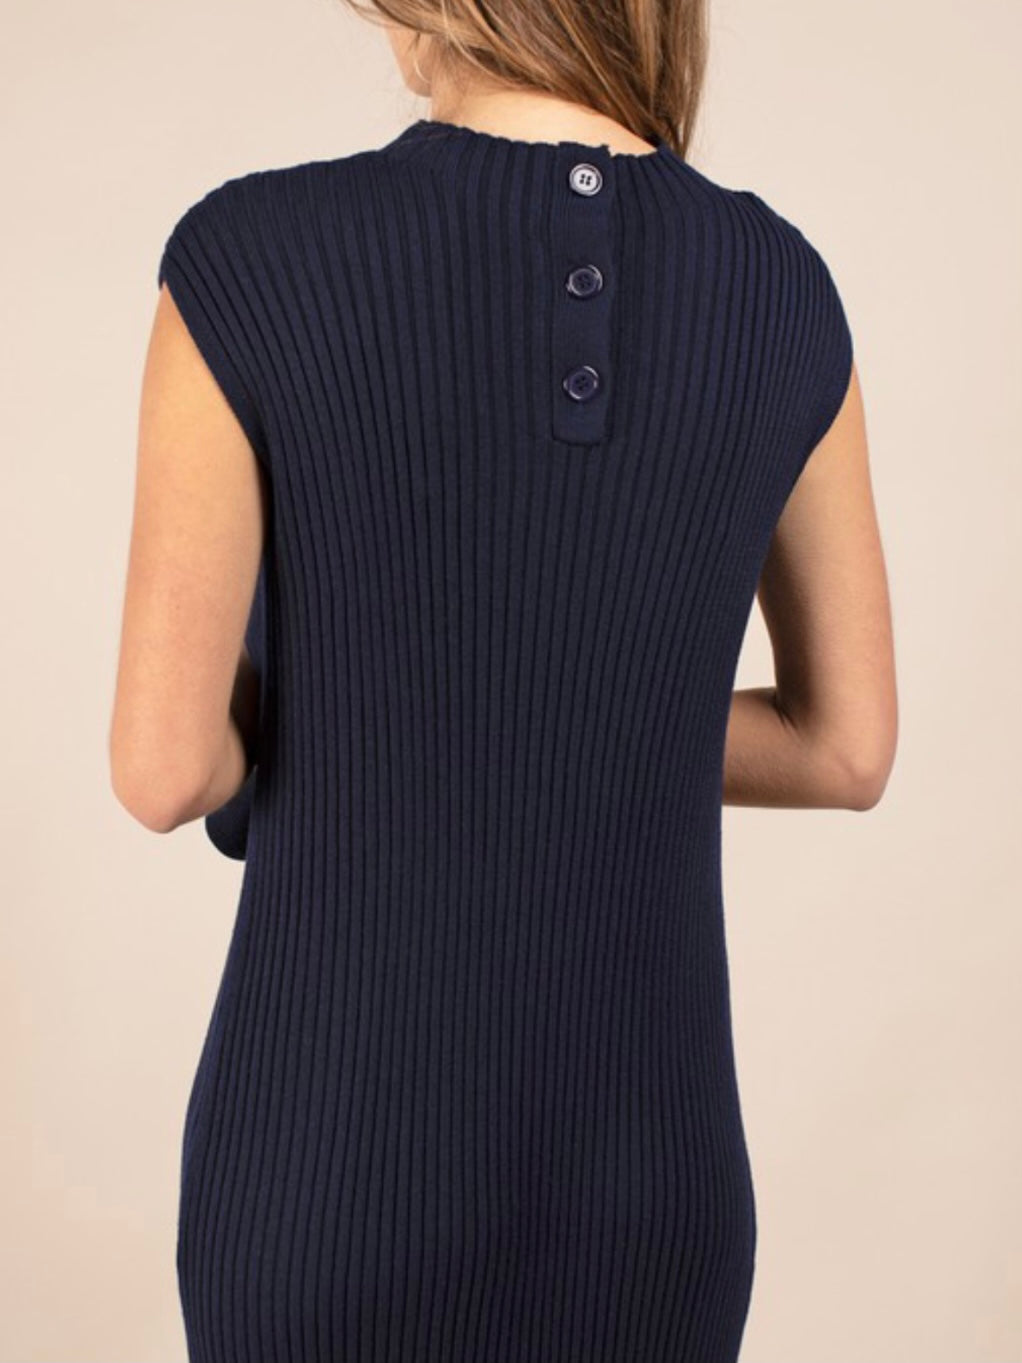 Cindy Ribbed Dress in Navy